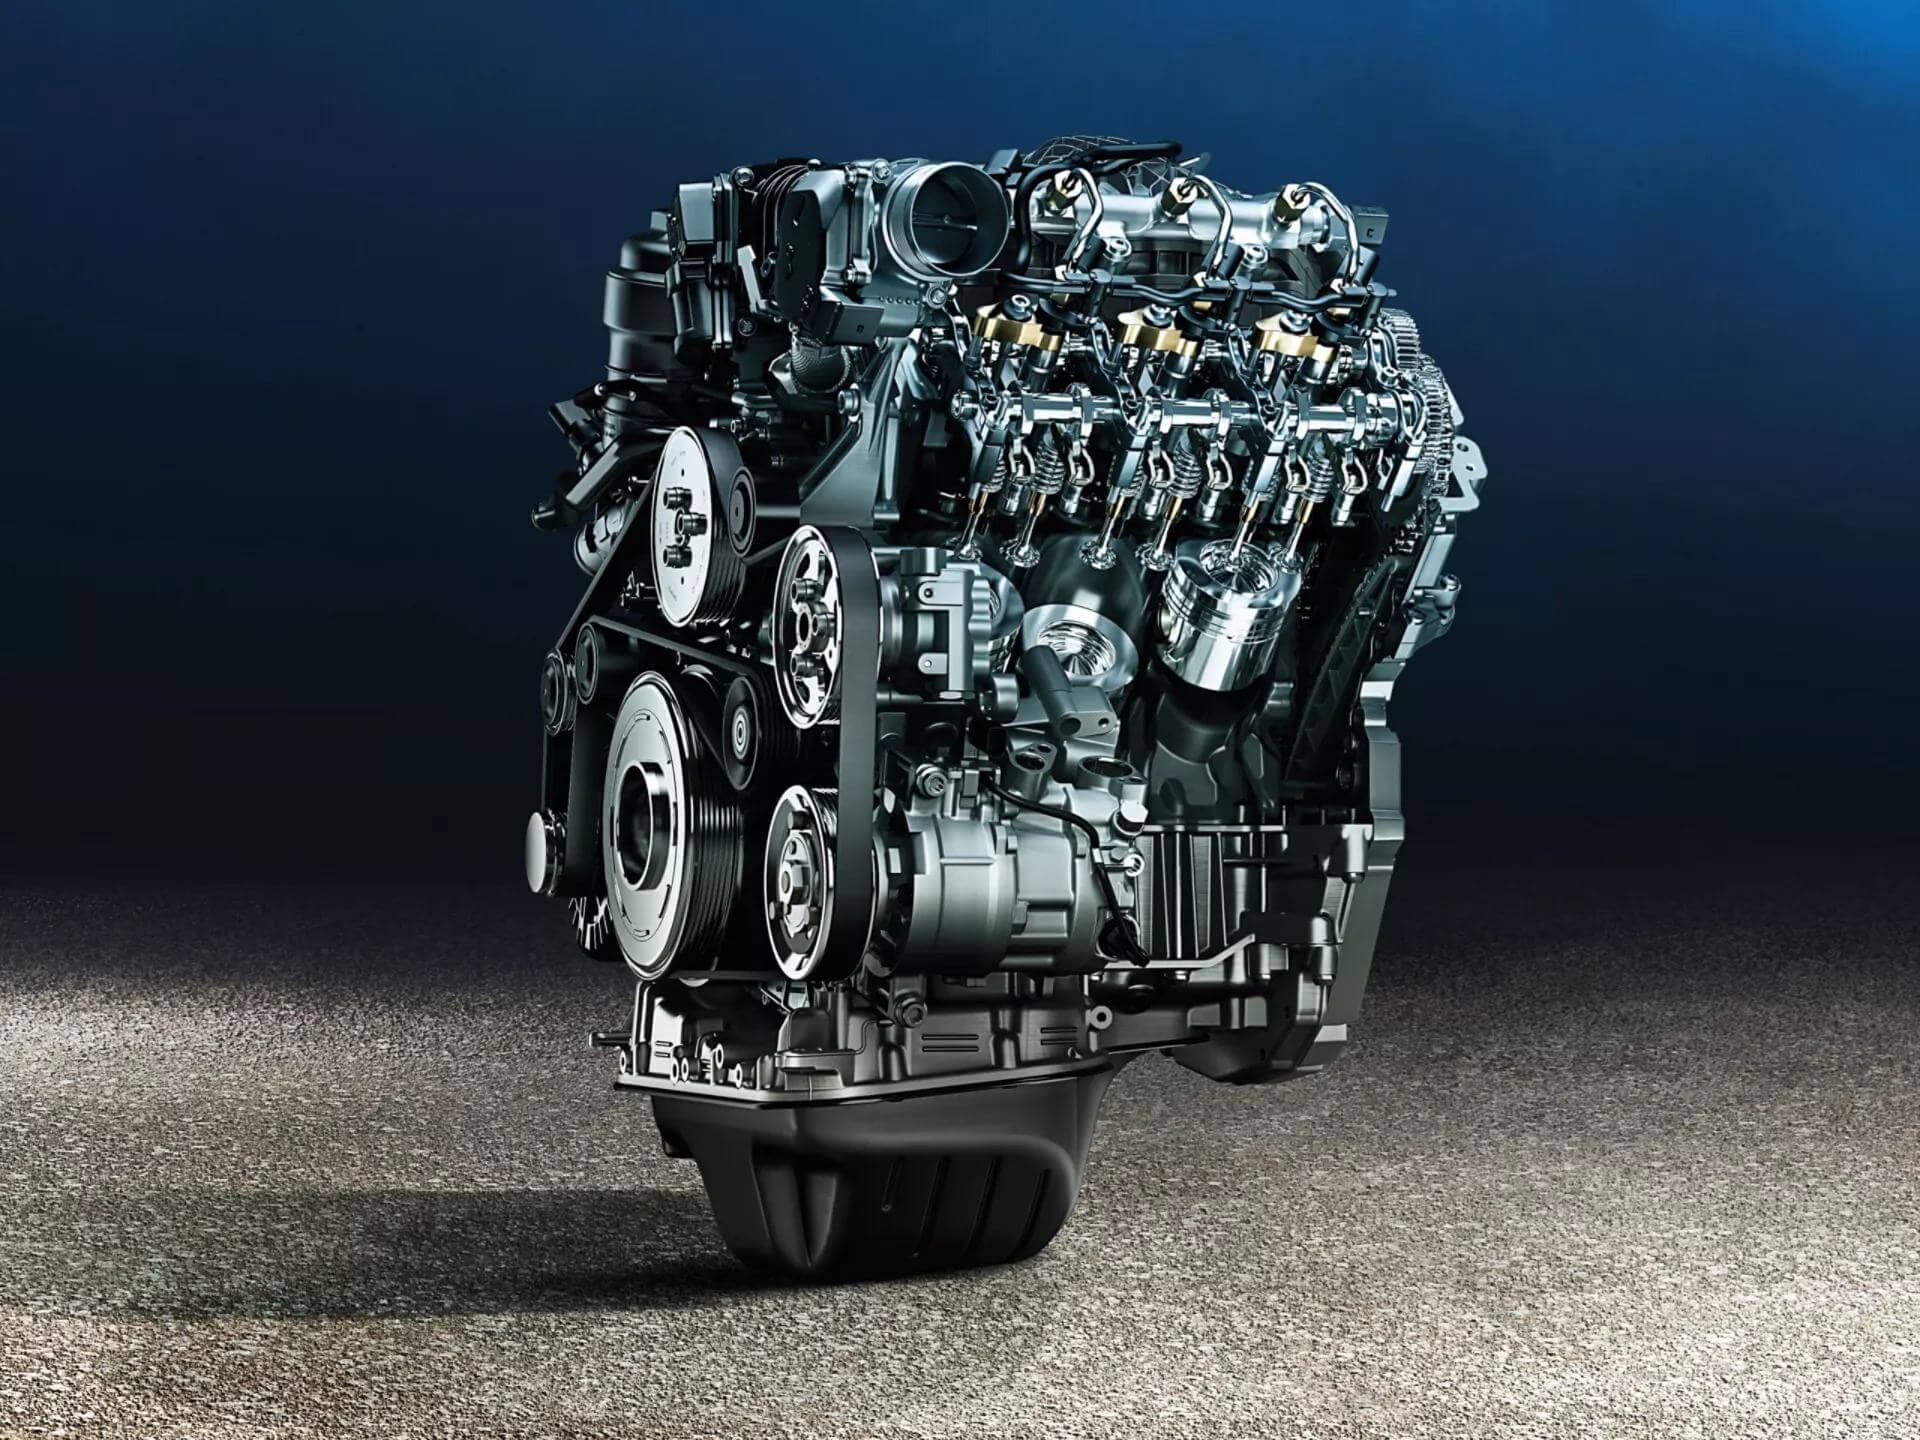 Power is its strong suit TDI Engine Image